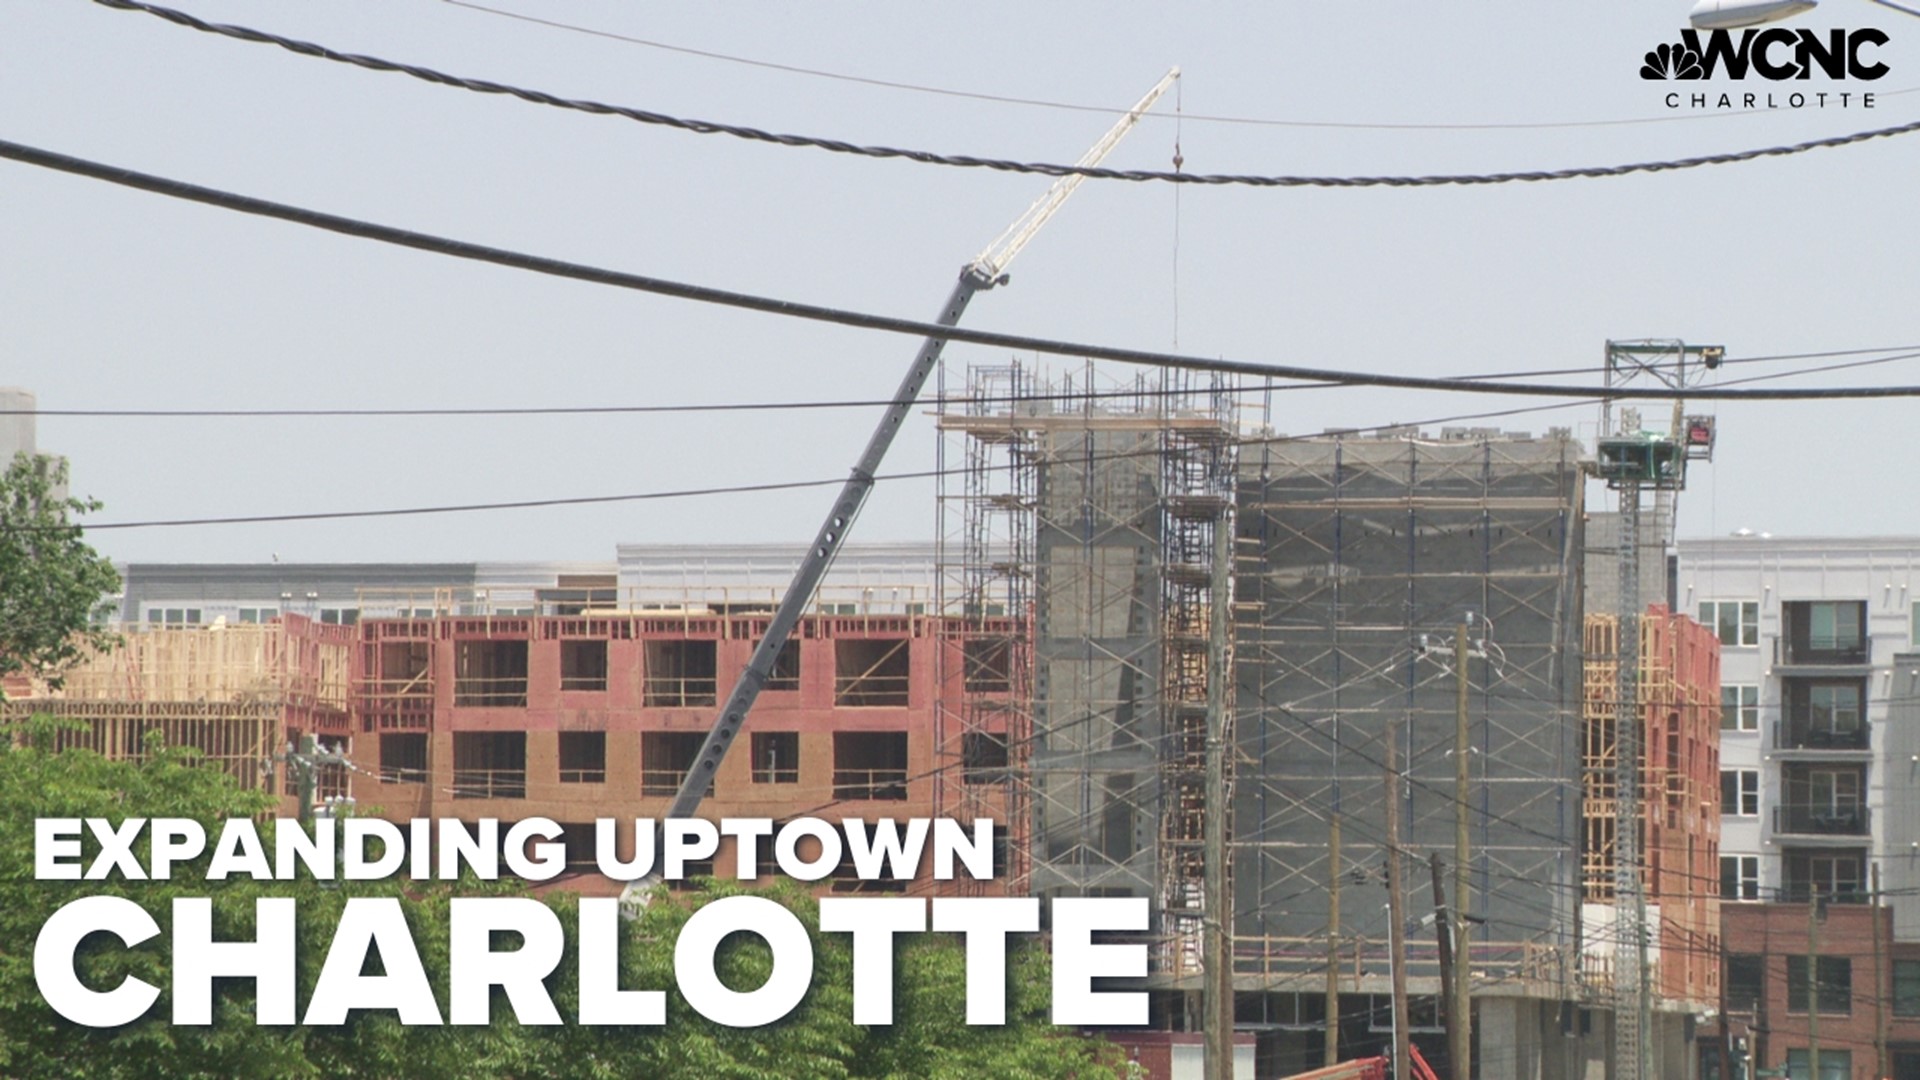 Crane operator business owner says they're busier than ever, but there are also concerns over vacancies in some of Uptown's office buildings.